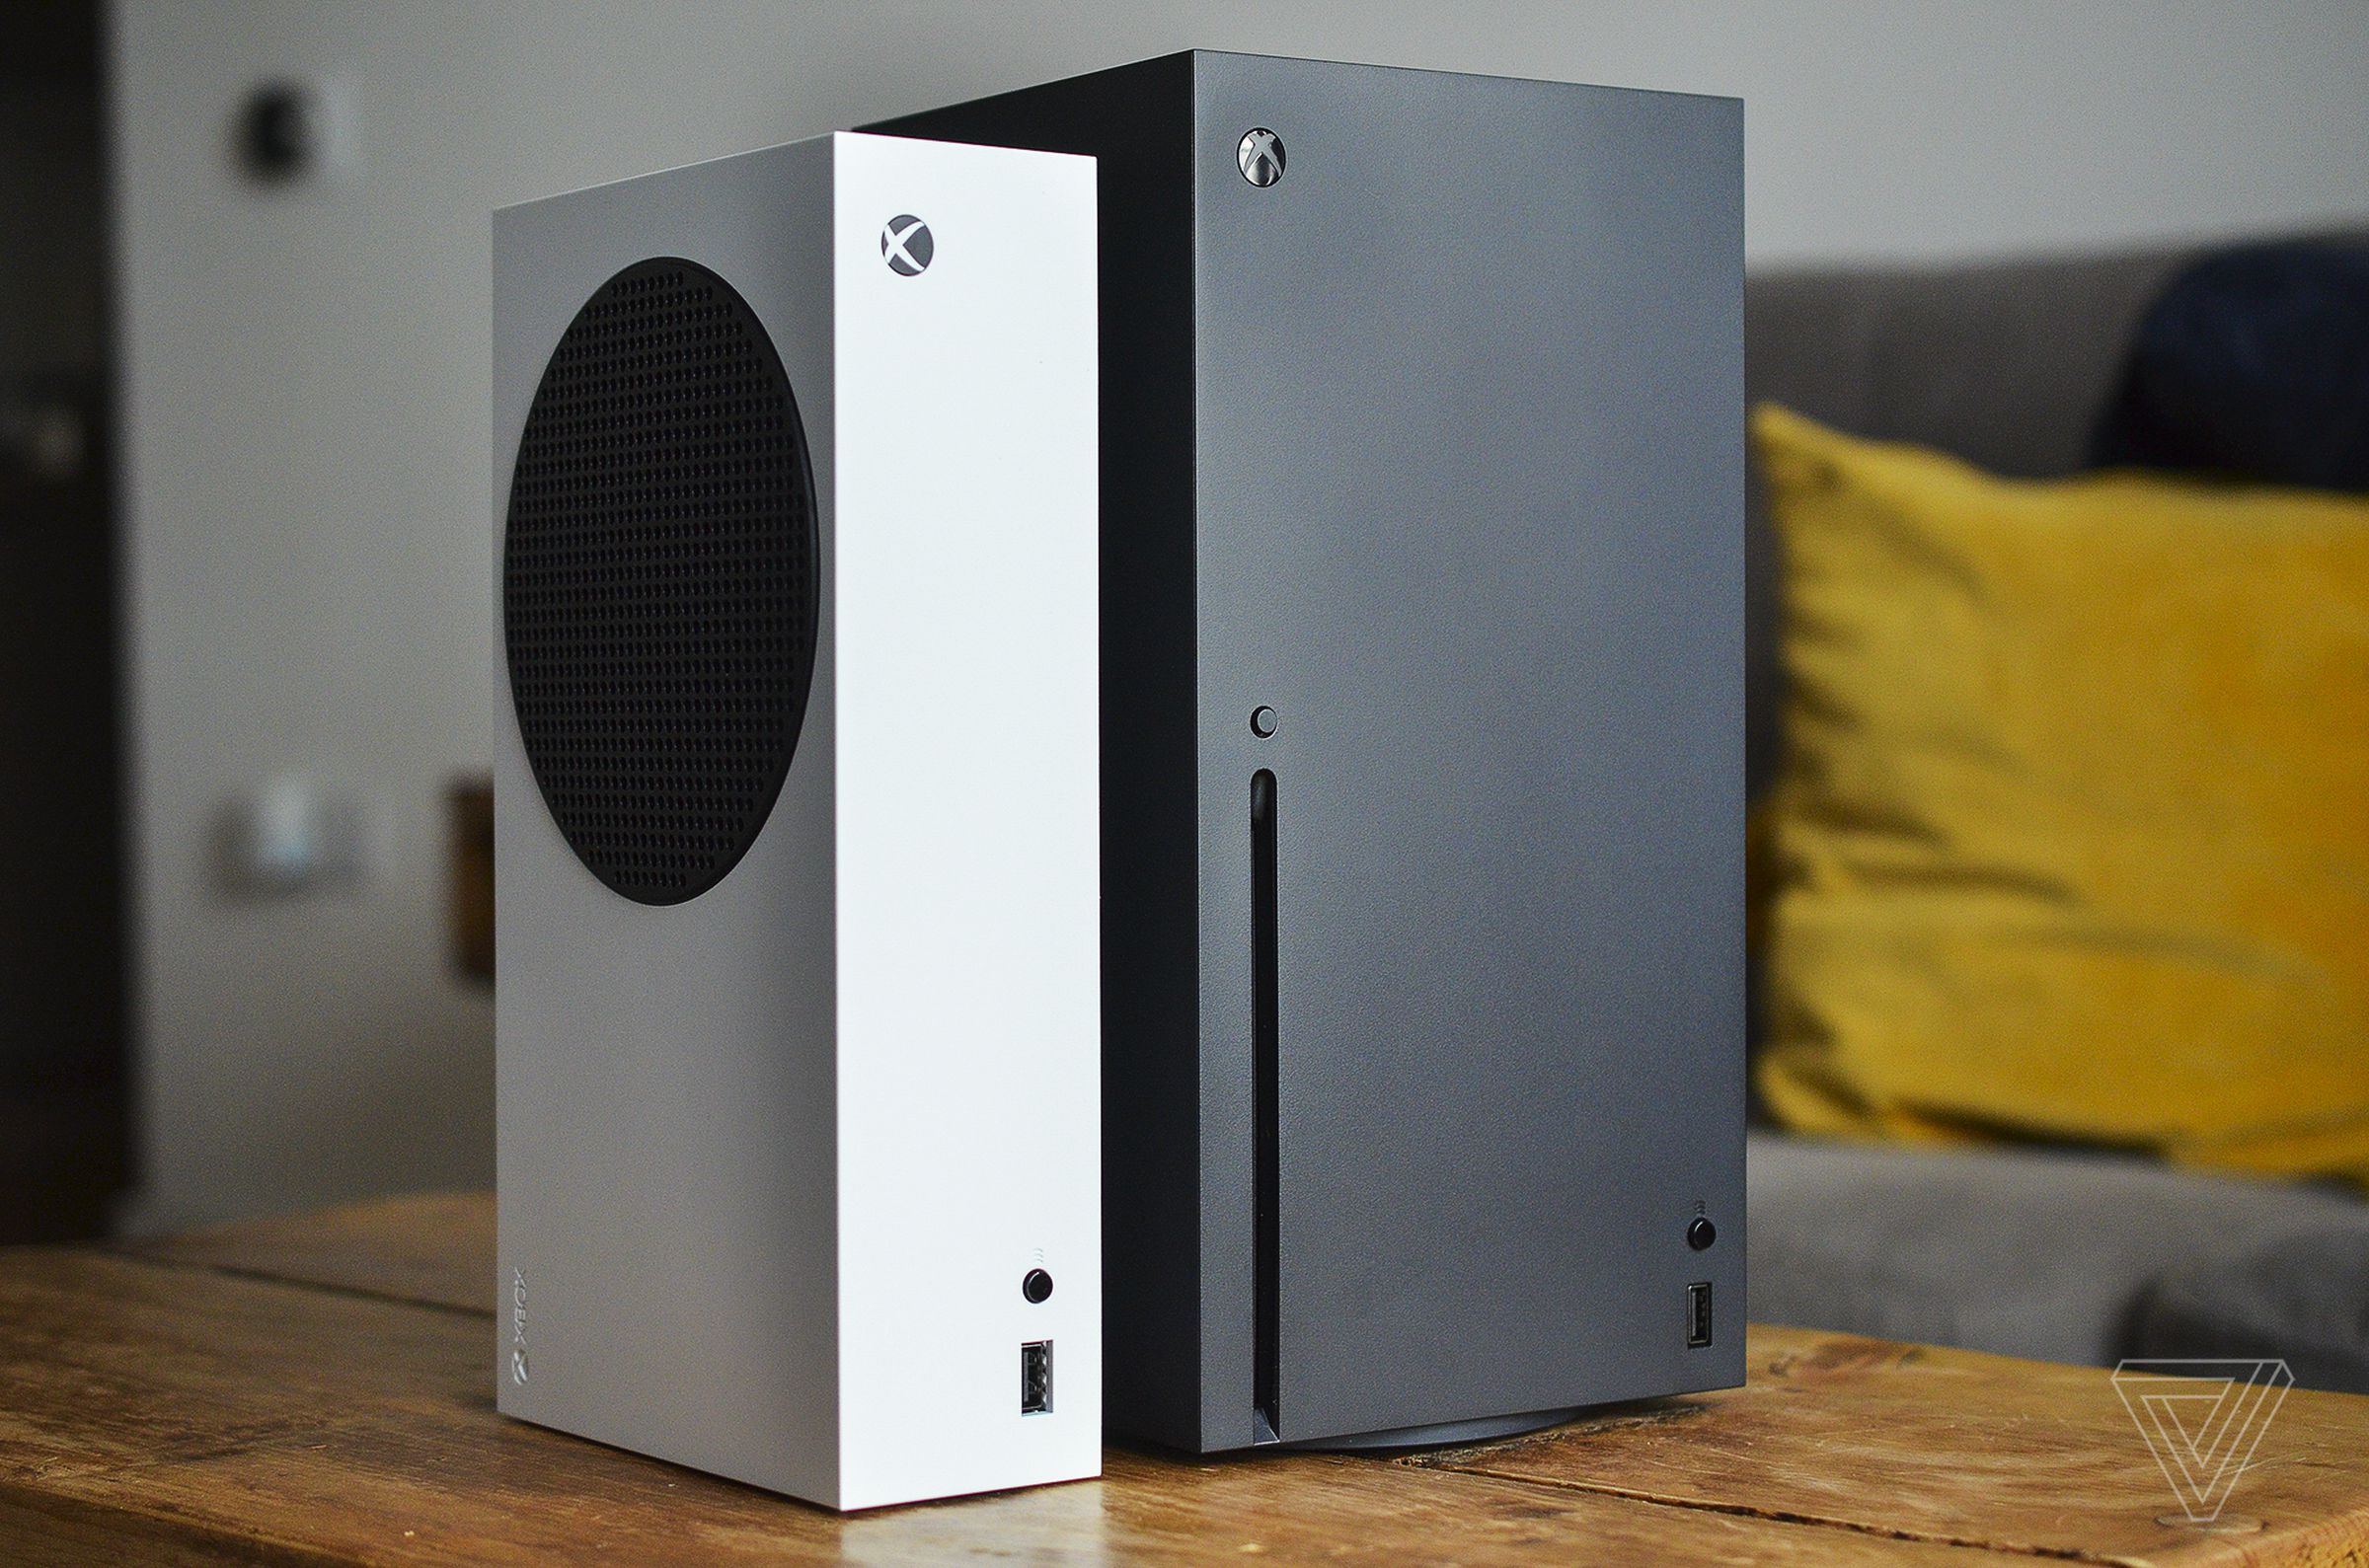 Microsoft's white Xbox Series S sits on a wooden coffee table in a room with a larger, black Xbox Series X.